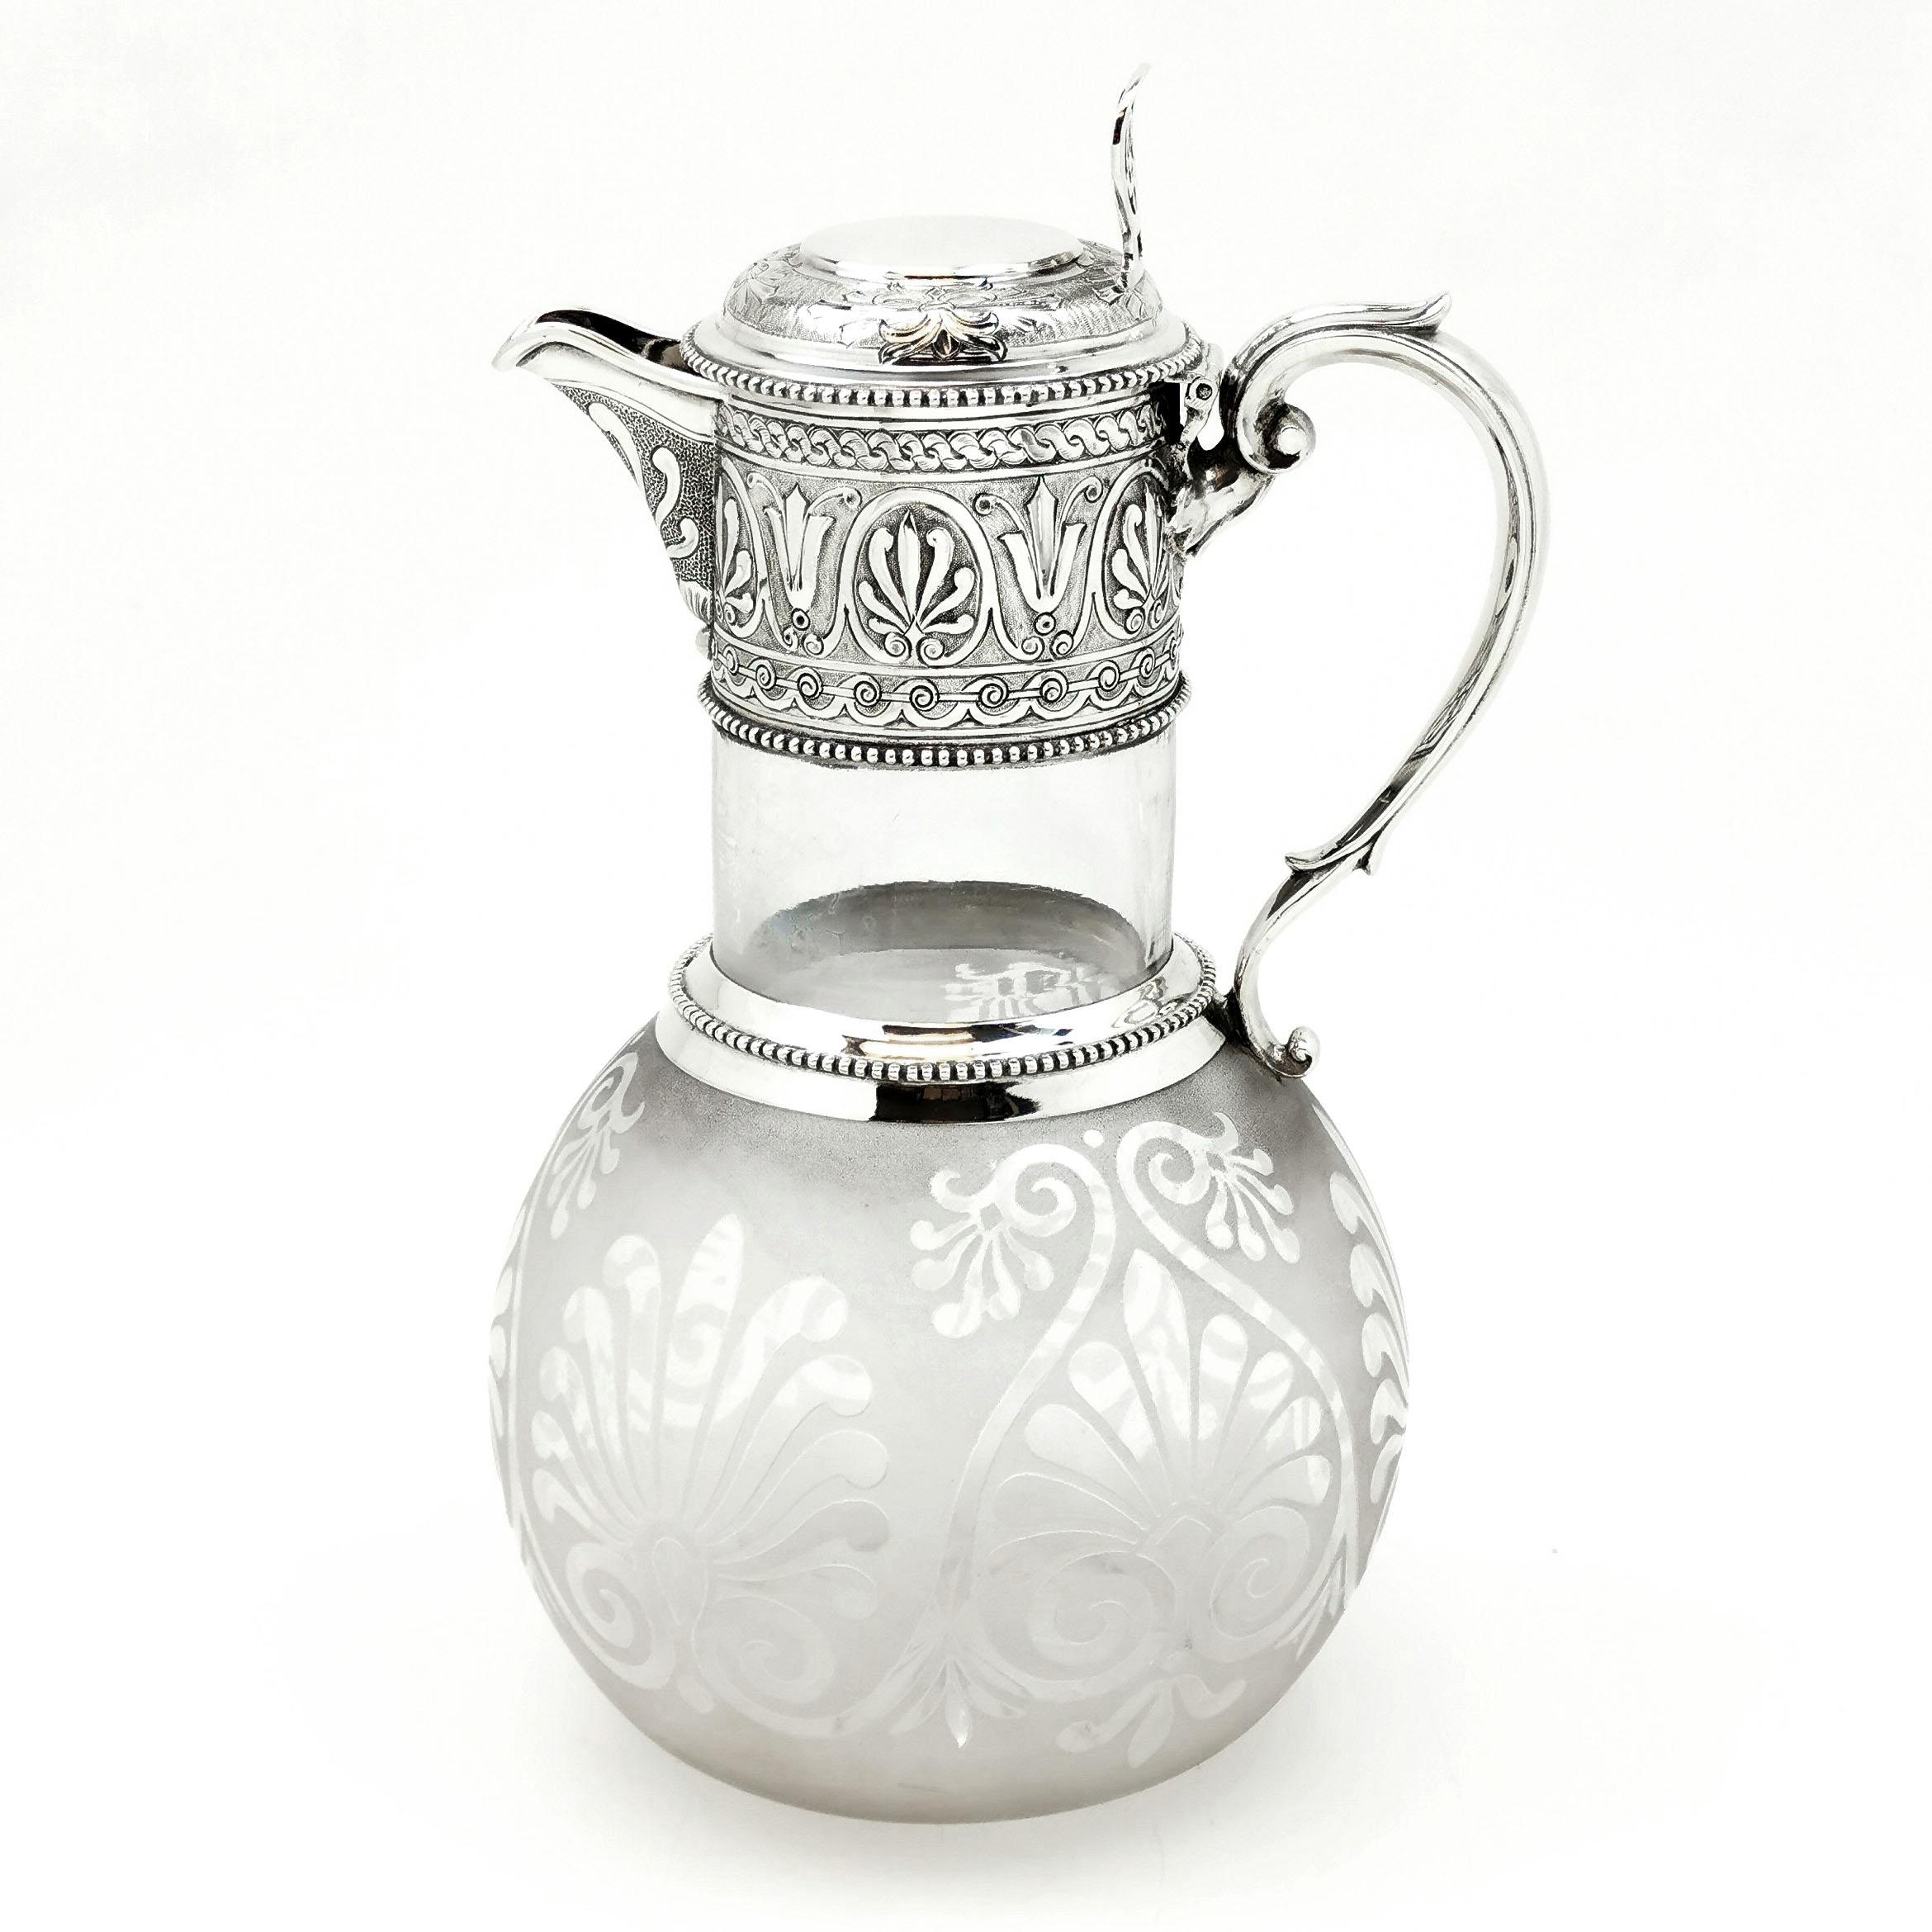 A lovely Antique Victorian Solid Silver Mounted Claret Jug with an elegant frosted glass body. The round Glass body has a delicate pattern frosted over the entire exterior. The Silver Neck and lid feature delicate chased patterns and one side of the